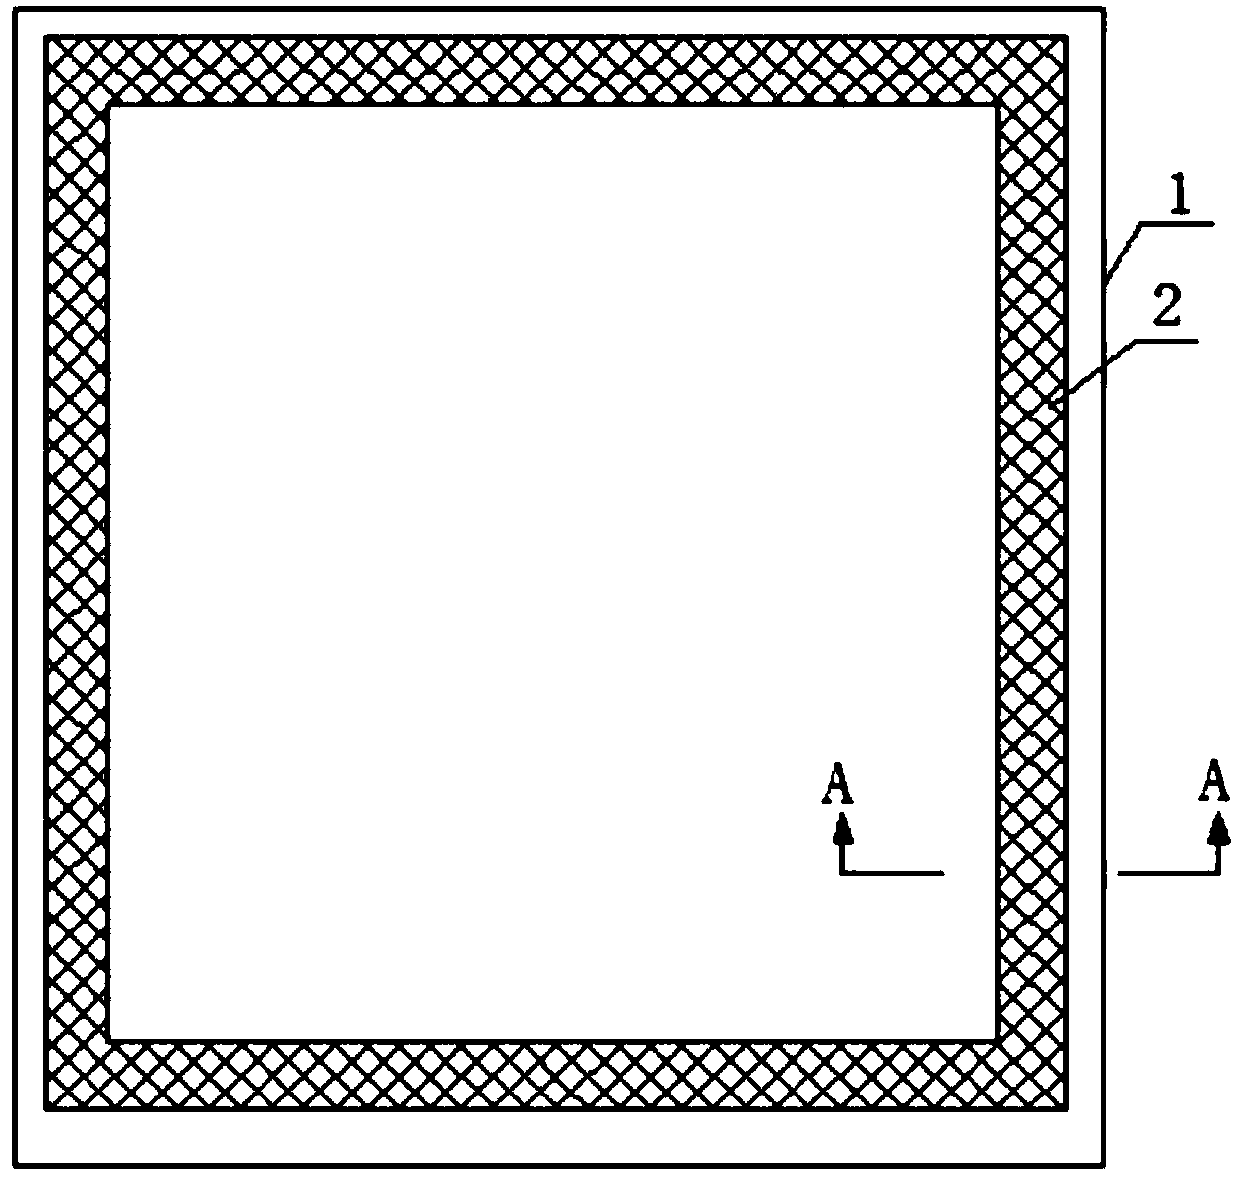 Array substrate